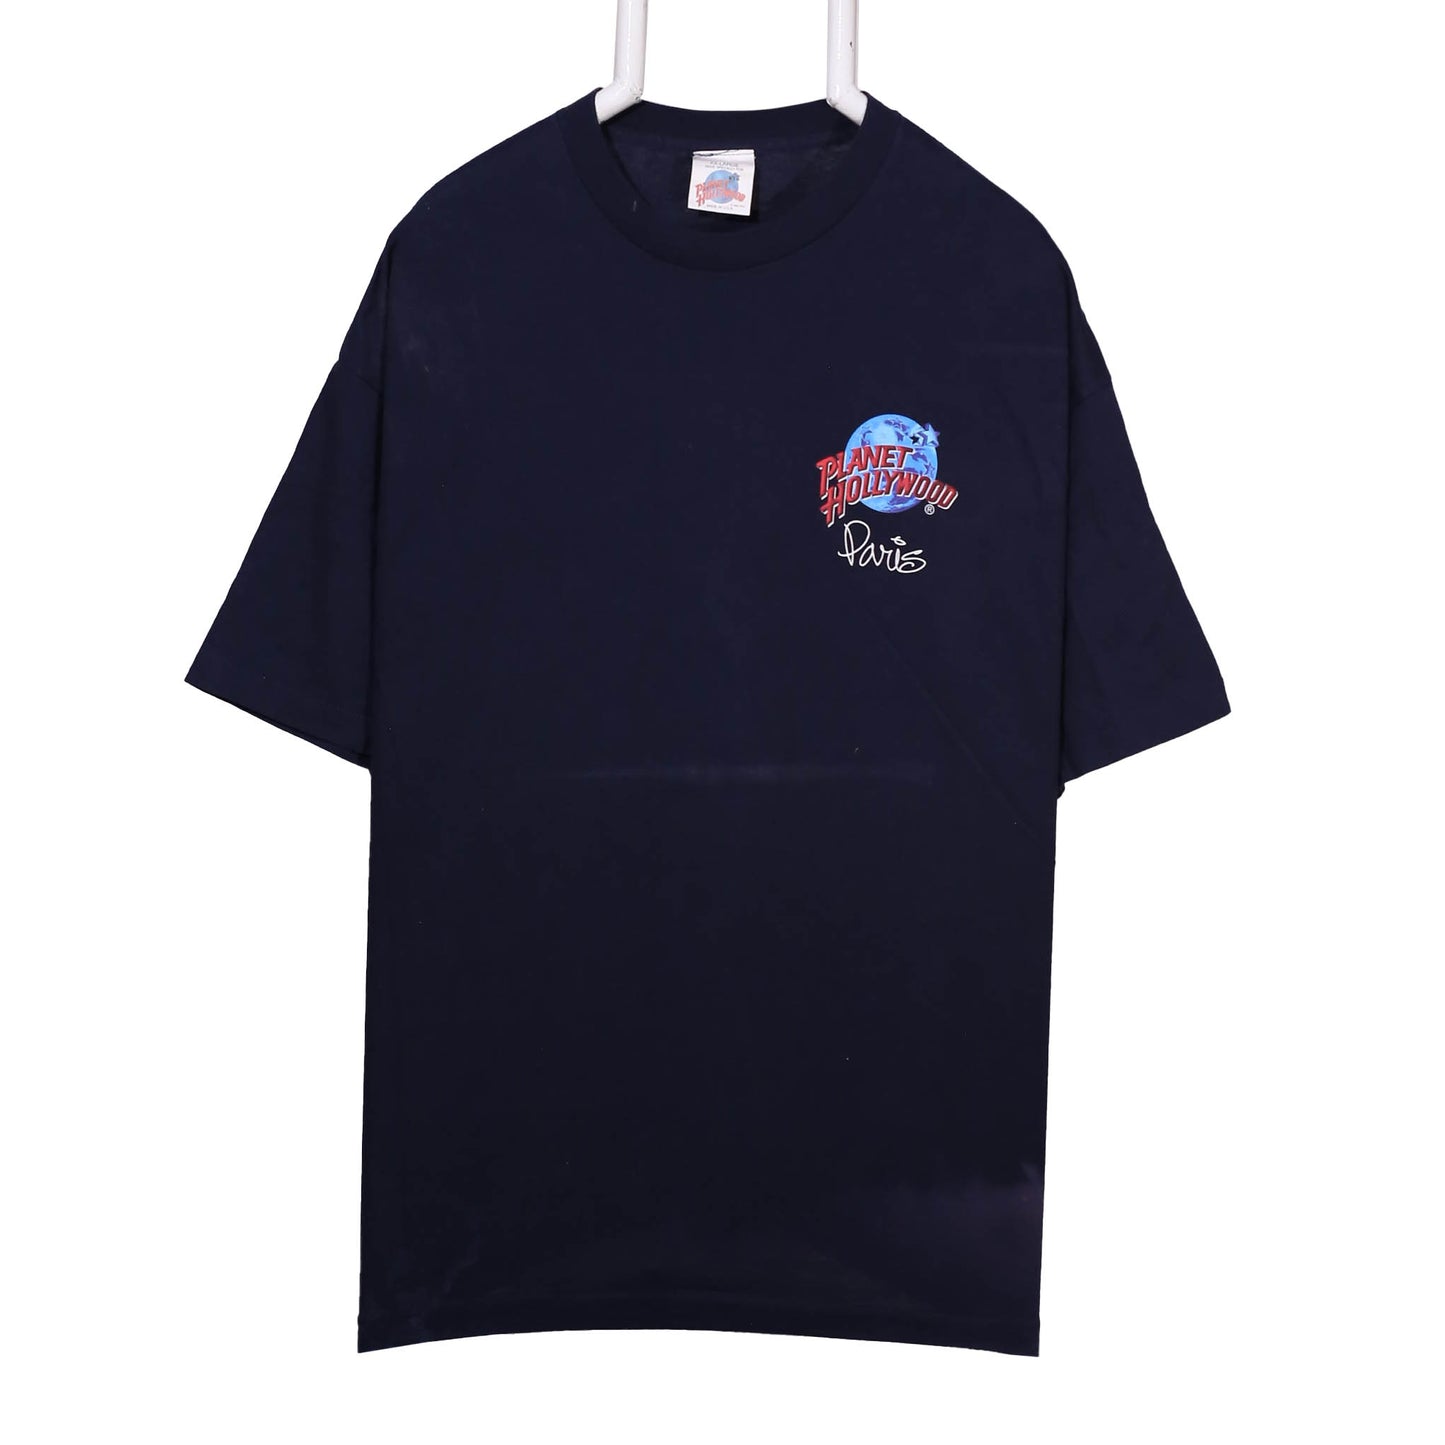 PLANET HOLLYWOOD ROUND NECK T SHIRT